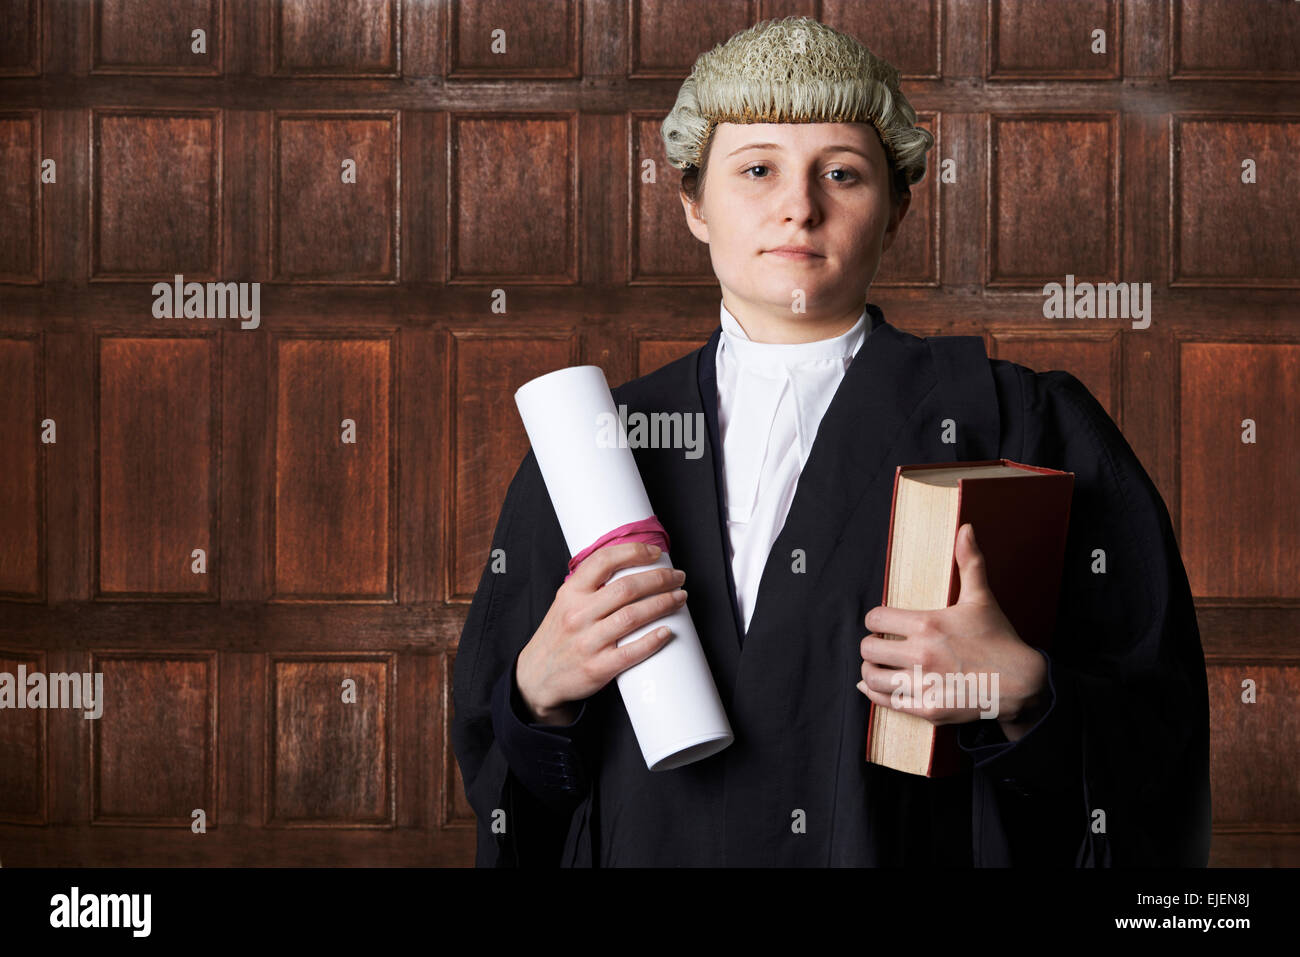 Portrait Of Female Lawyer In Court Holding Brief And Book Stock Photo